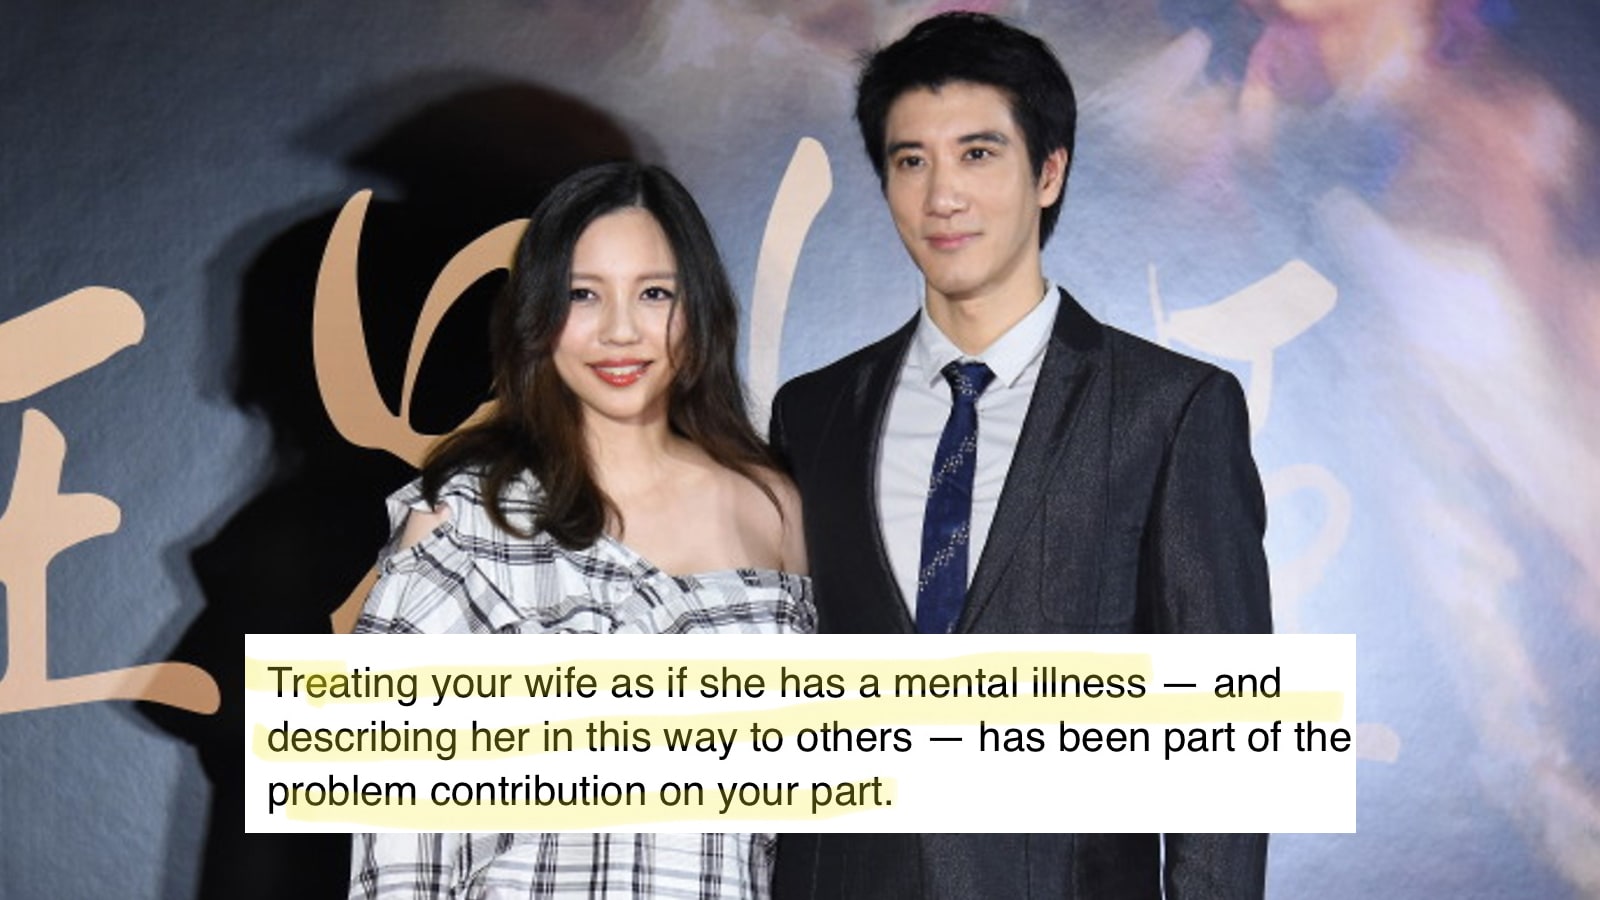 Lee Jinglei Says Wang Leehom Was Diagnosed With “Sex Addiction & Narcissictic Personality Disorder”; Shoots Down His Claims Of Innocence